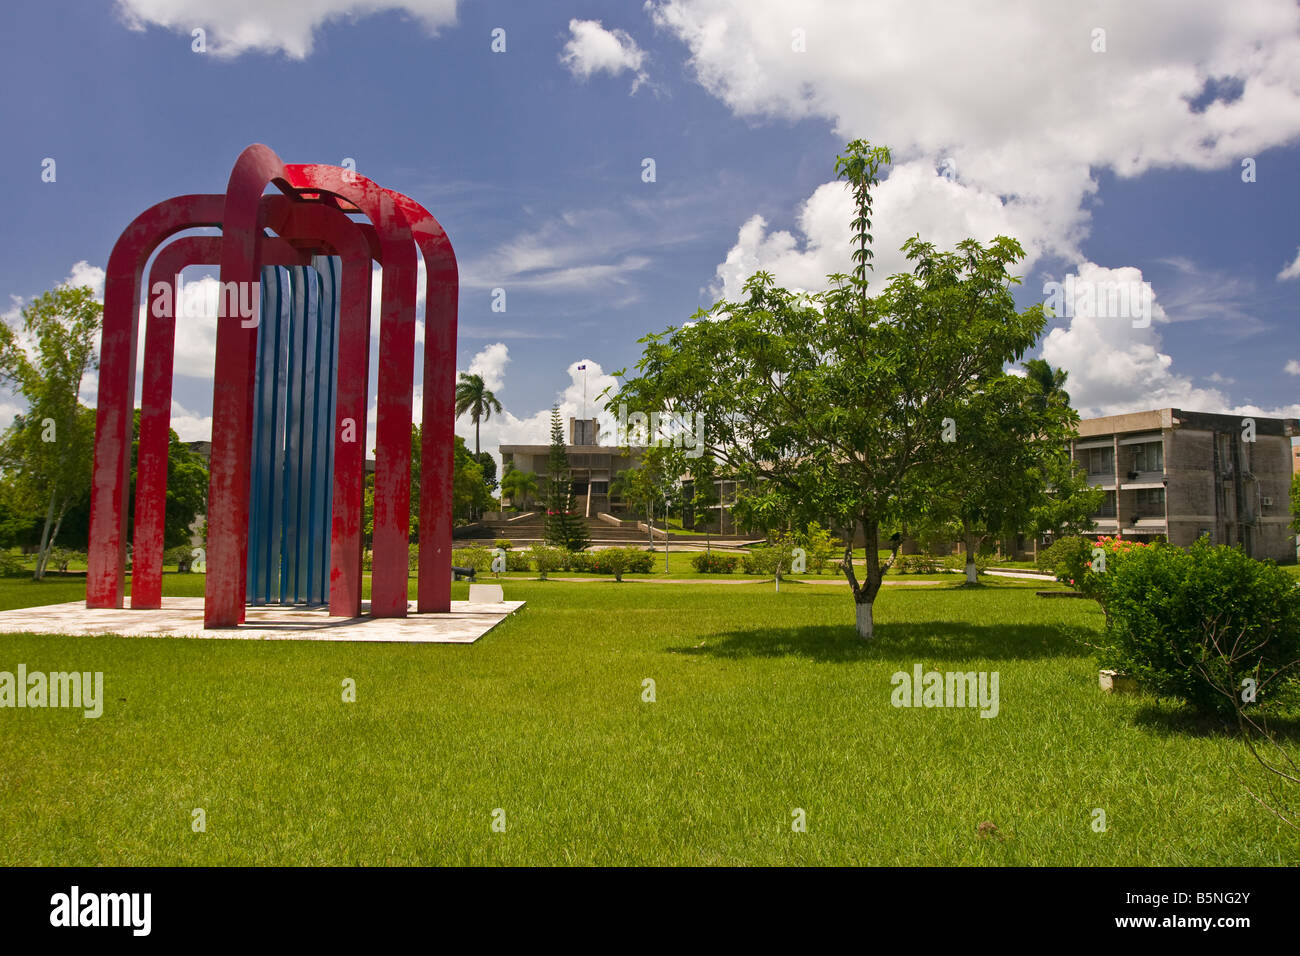 BELMOPAN BELIZE Sculpture with government buildings at rear in the national capital city of Belmopan Stock Photo